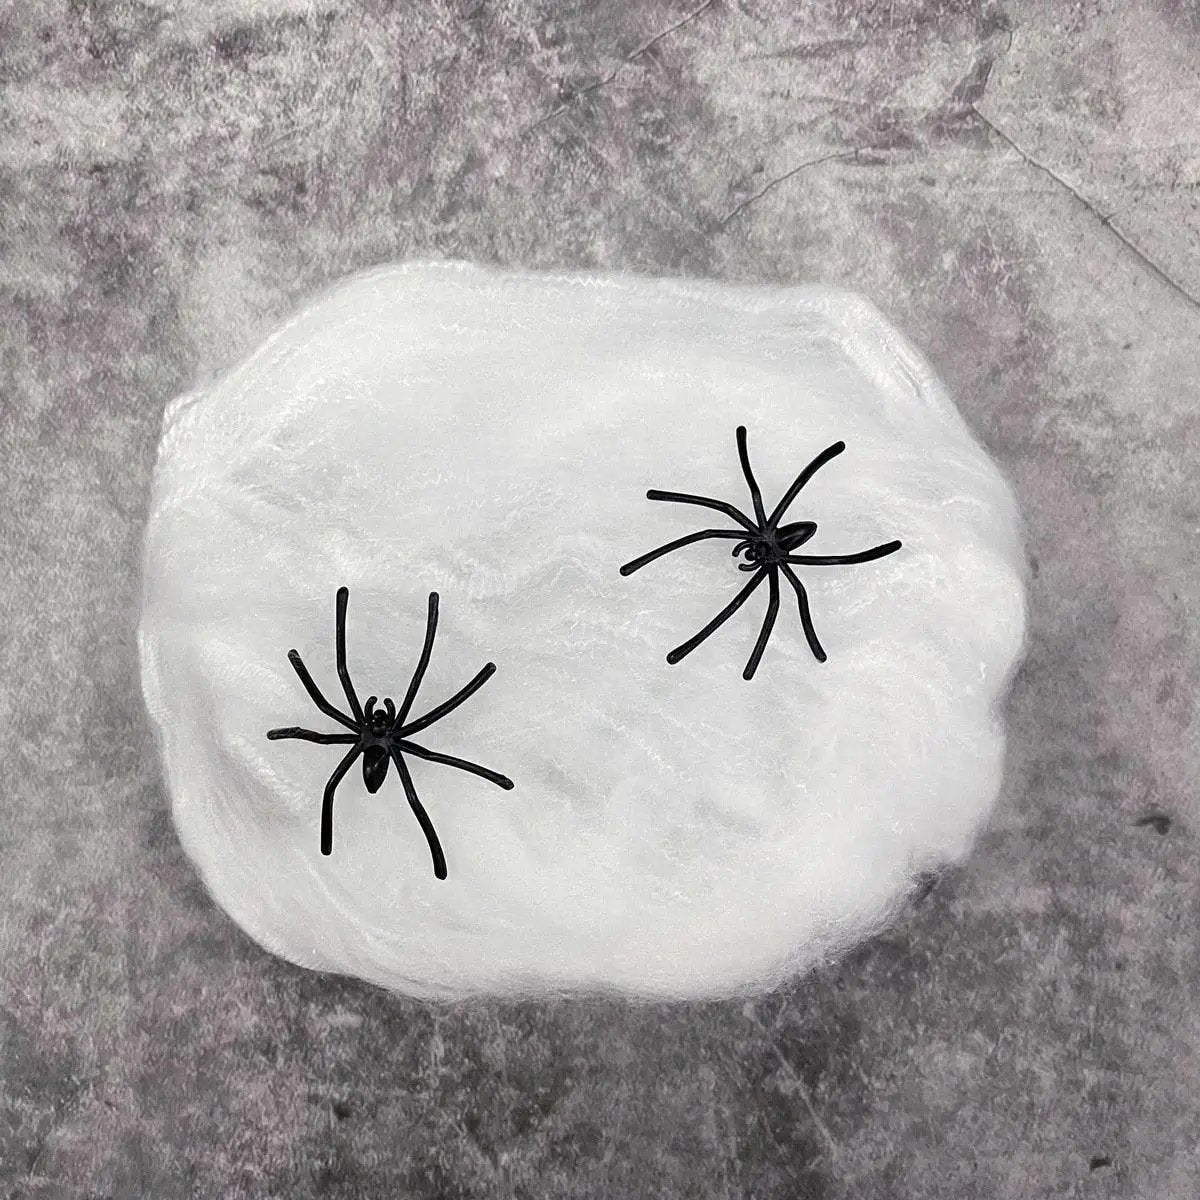 a rock with two black spider's on it